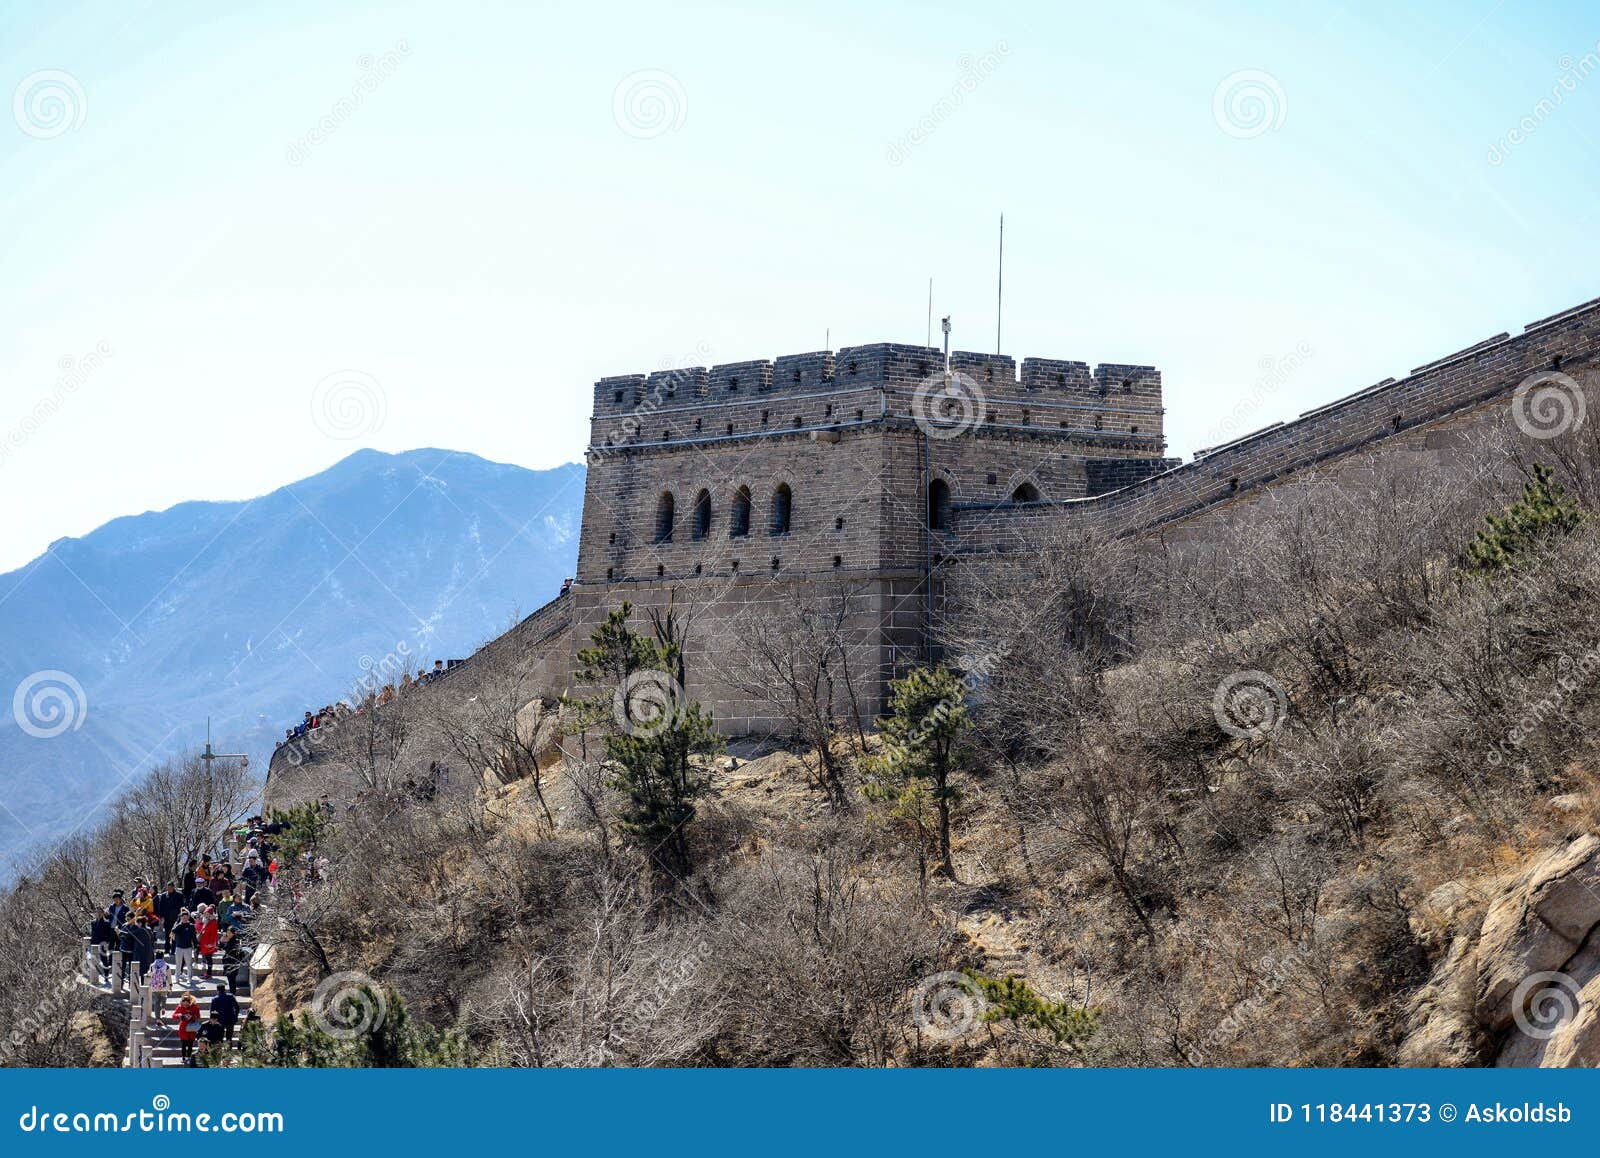 Great Chinese Wall In The Mountains Near Beijing Editorial Stock Photo - Image of landscape ...